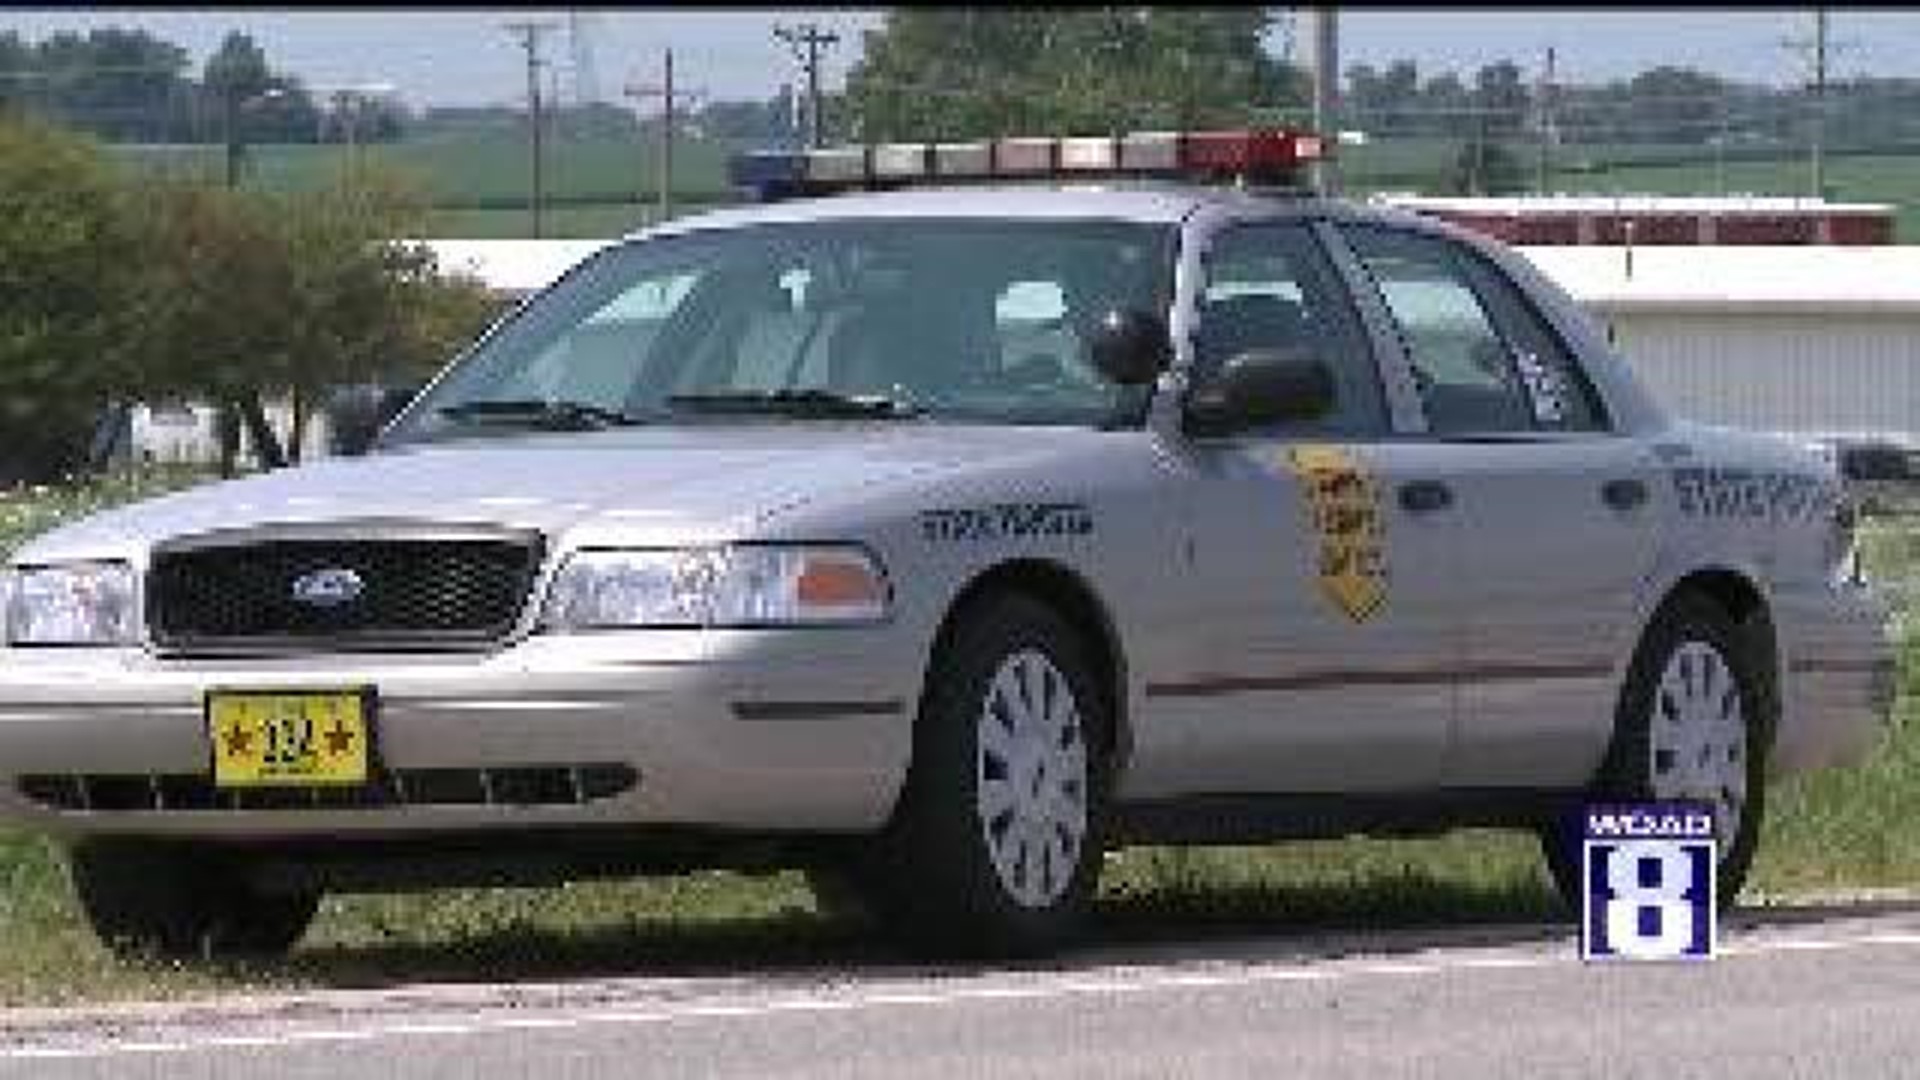 Iowa plans to mark unmarked police cars